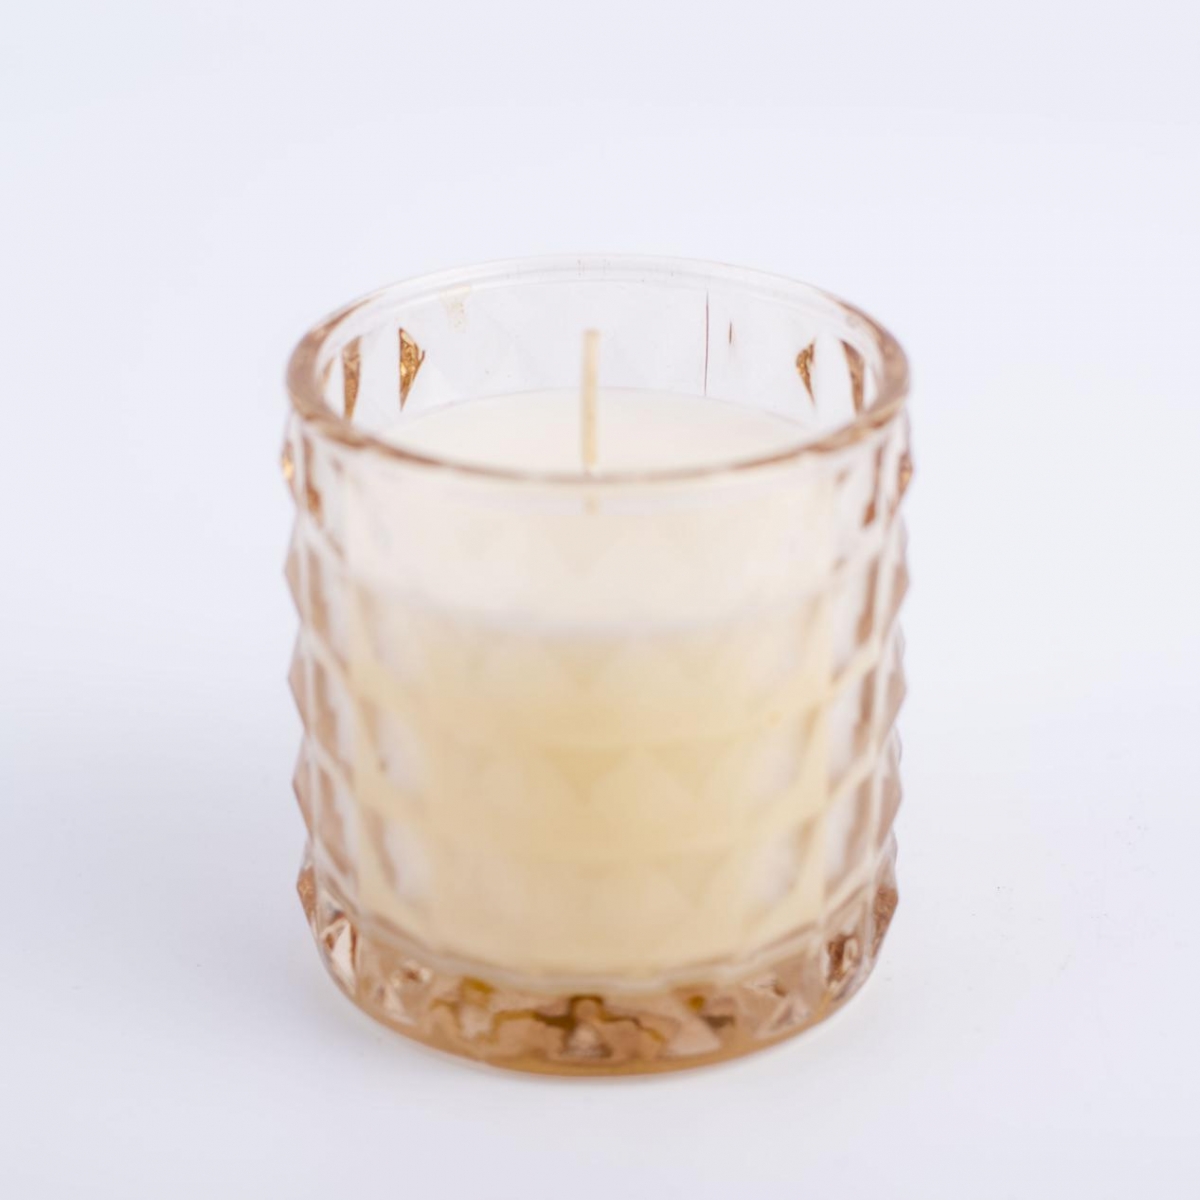 Scented Candles-Soy Candles ,Diamond Candle Jar ,Aromatherapy Candles, China Factory ,Wholesale Price-HOWCANDLE-Candles,Scented Candles,Aromatherapy Candles,Soy Candles,Vegan Candles,Jar Candles,Pillar Candles,Candle Gift Sets,Essential Oils,Reed Diffuser,Candle Holder,